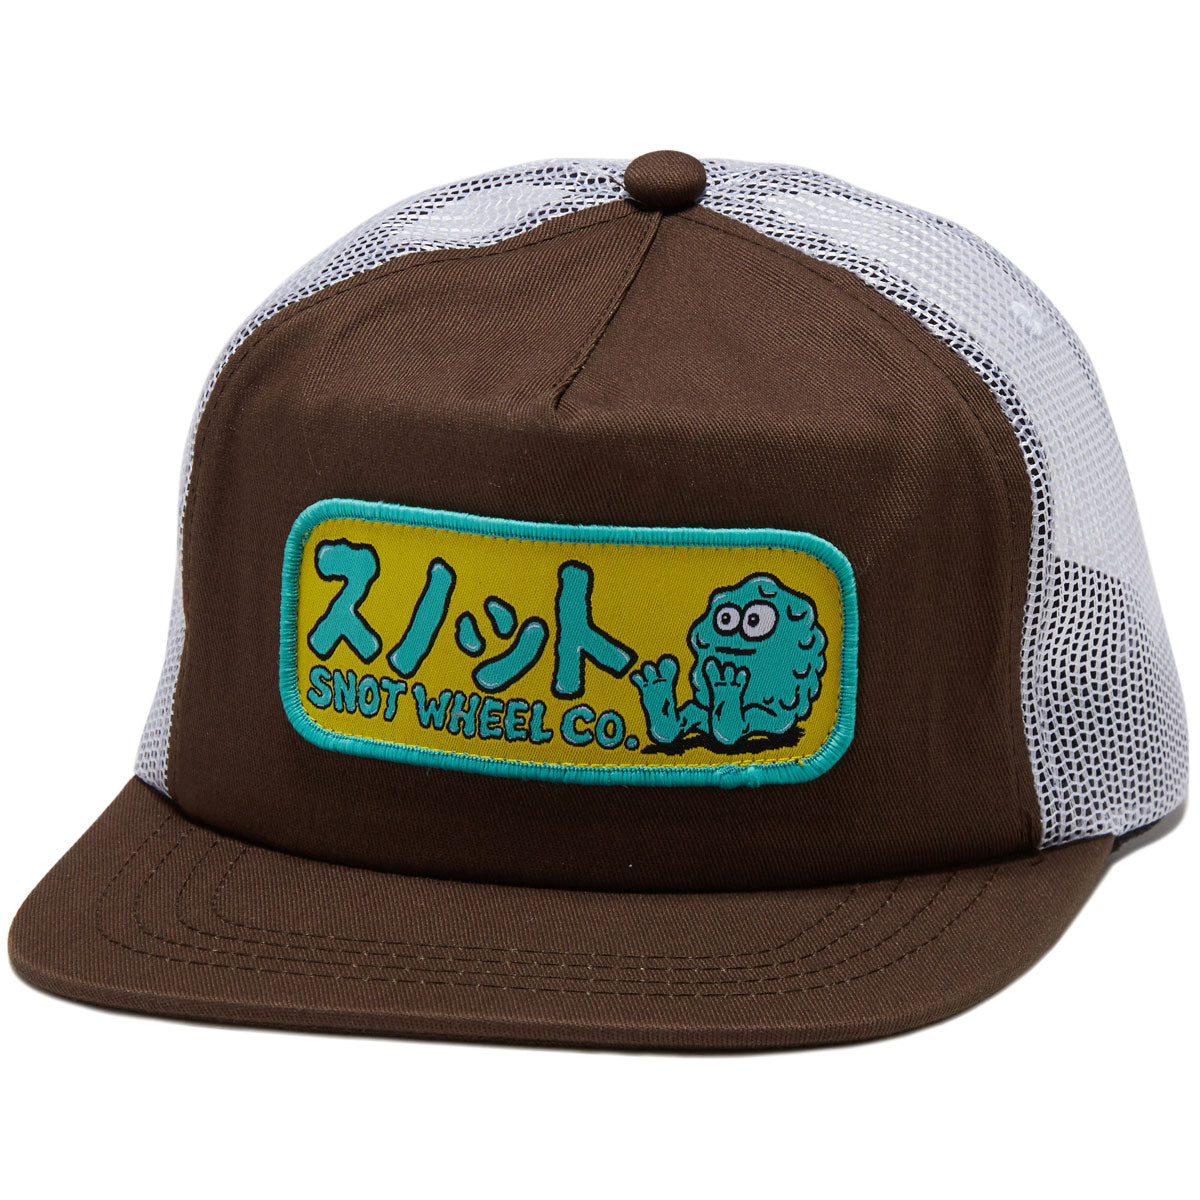 Snot Classic Japan Trucker Hat - Brown image 1